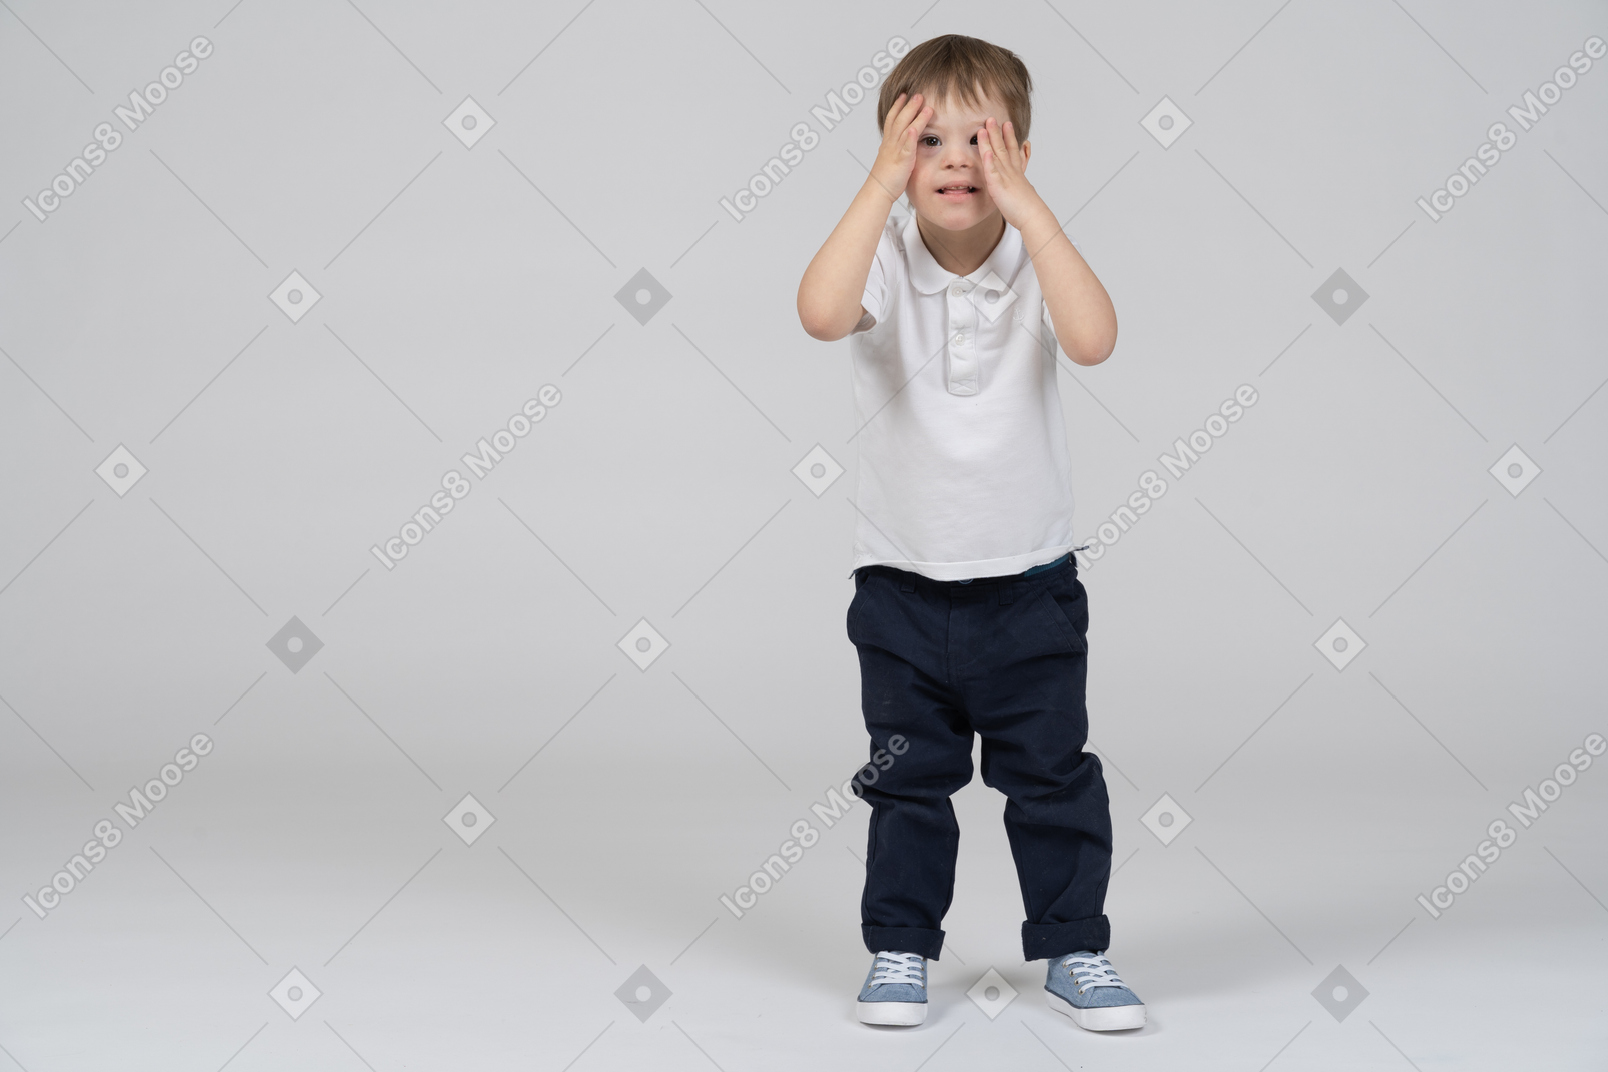 Little boy standing with hands on his face